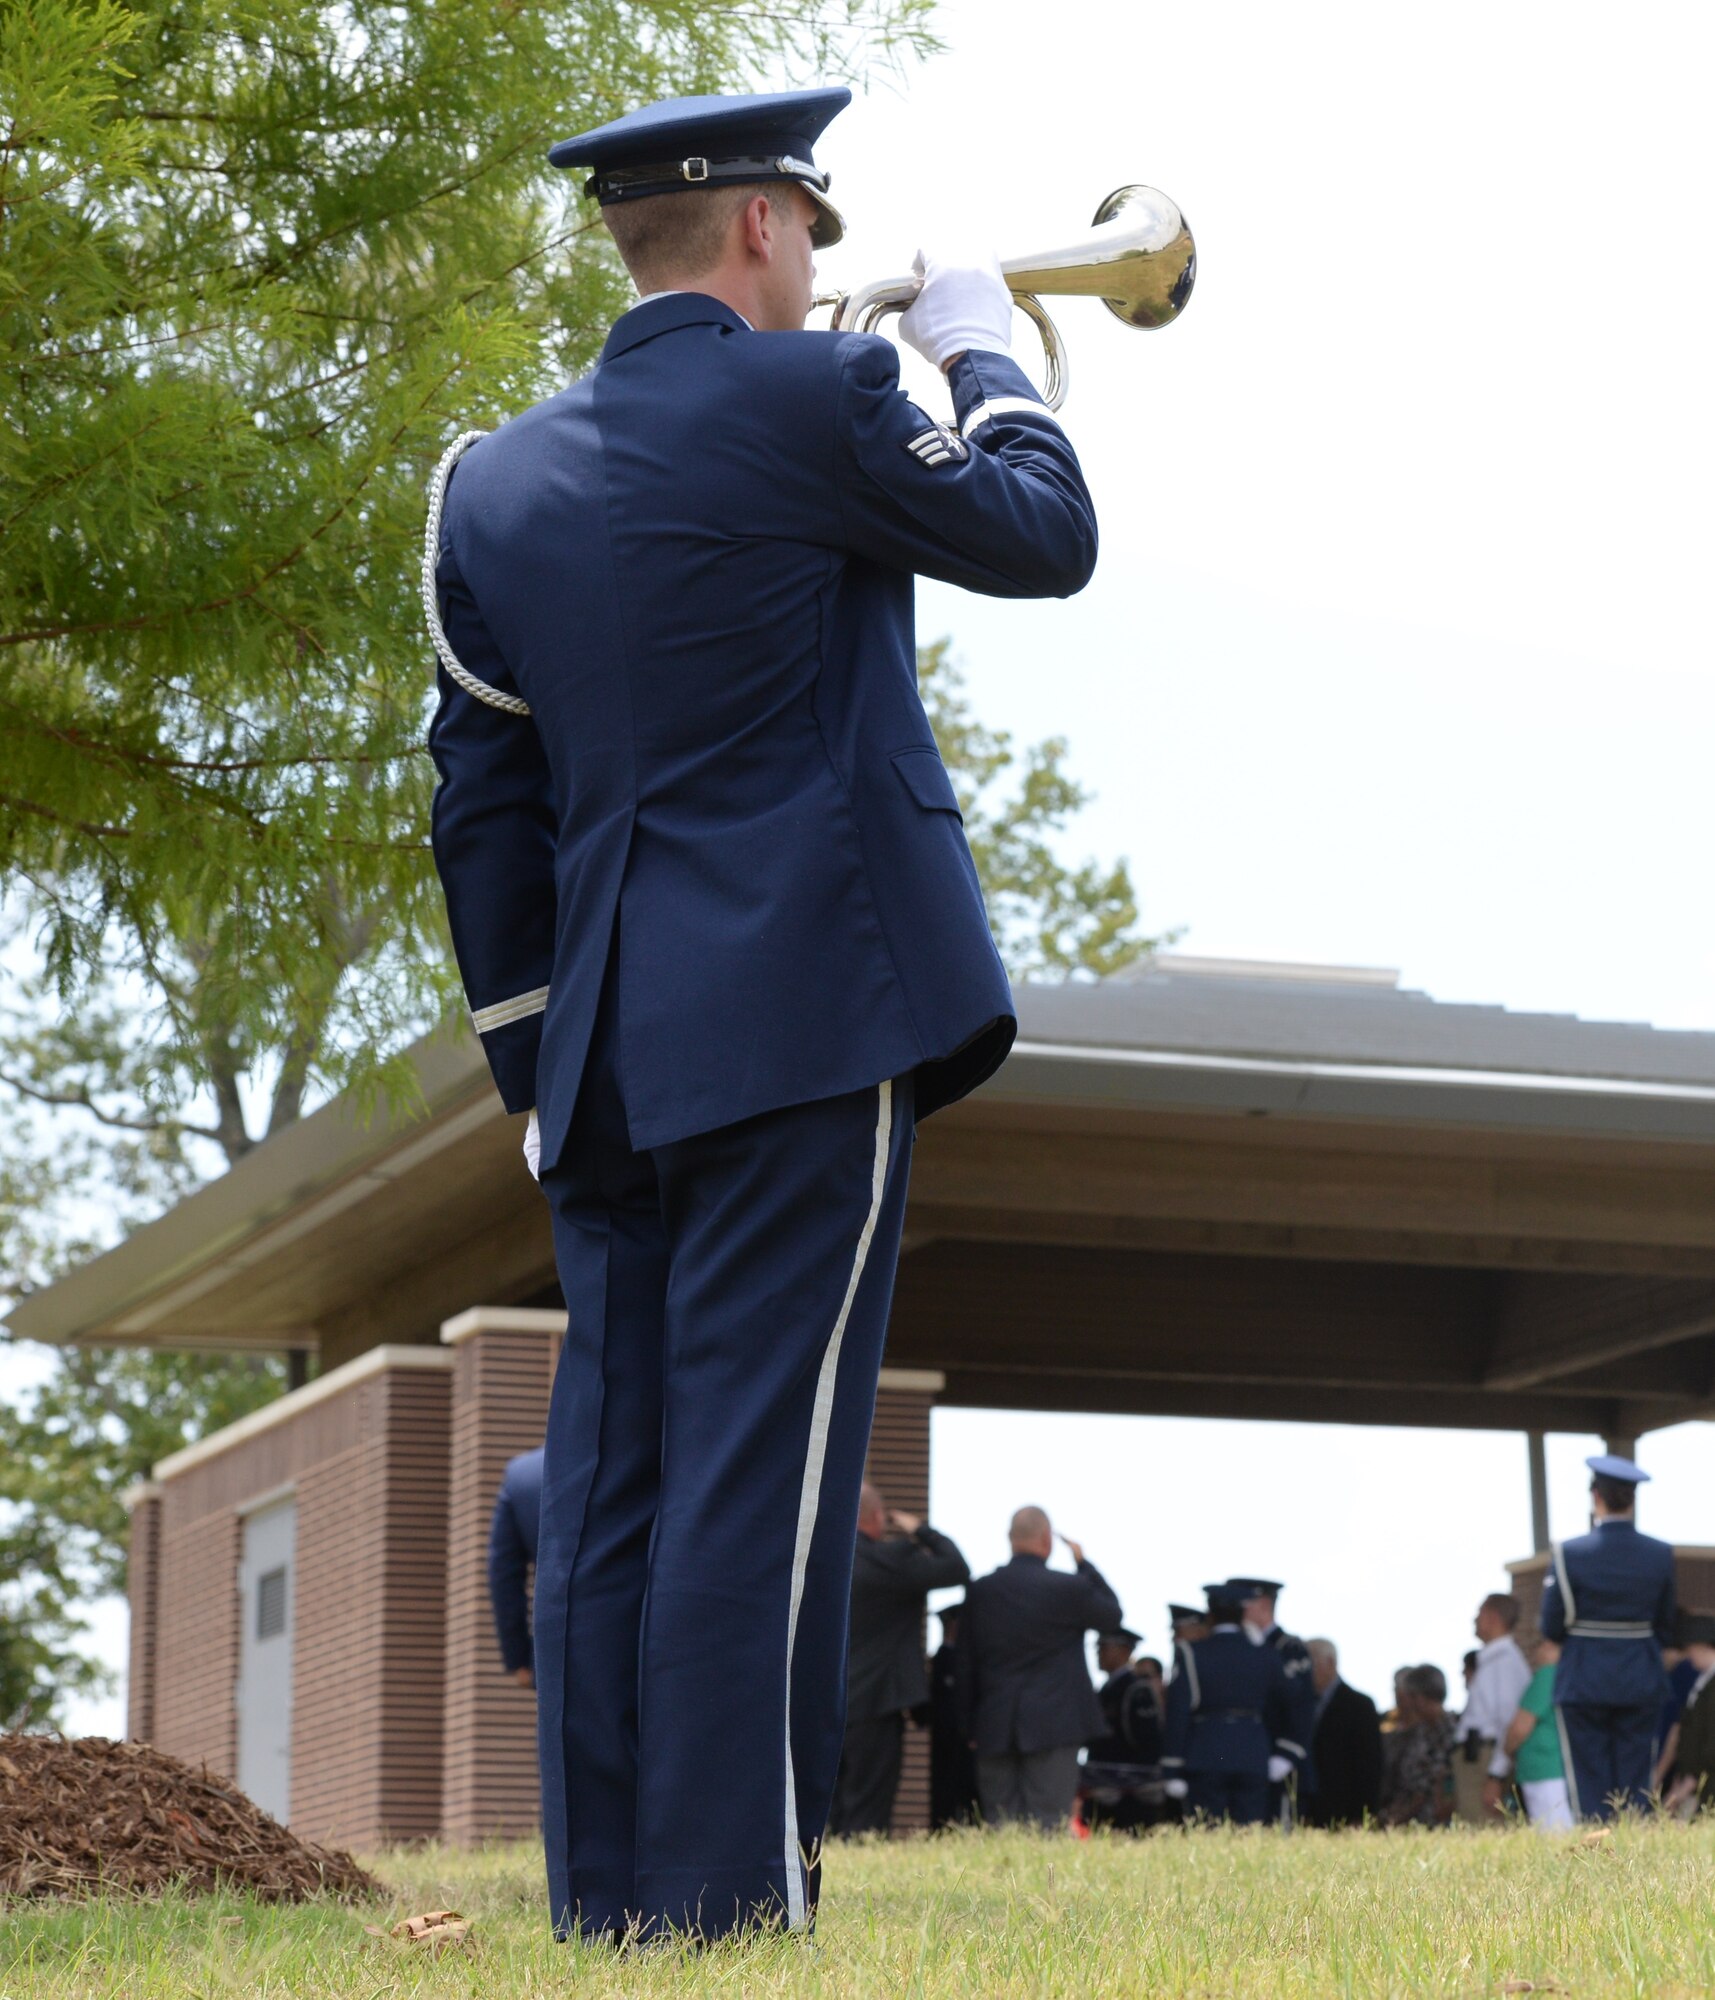 Senior Airman Justin Keller, Columbus Air Force Base Honor guardsman, plays Taps for a Missing in Action ceremony for Capt. Frederick Partridge Aug. 10 at the Mississippi Veterans Memorial Cemetery. A native of Sumner, Mississippi, Partridge served in both World War II and in Korea in his eight years of service until he was shot down the morning of Aug. 10, 1952. (U.S. Air Force photo/2nd Lt. Lauren Woods)